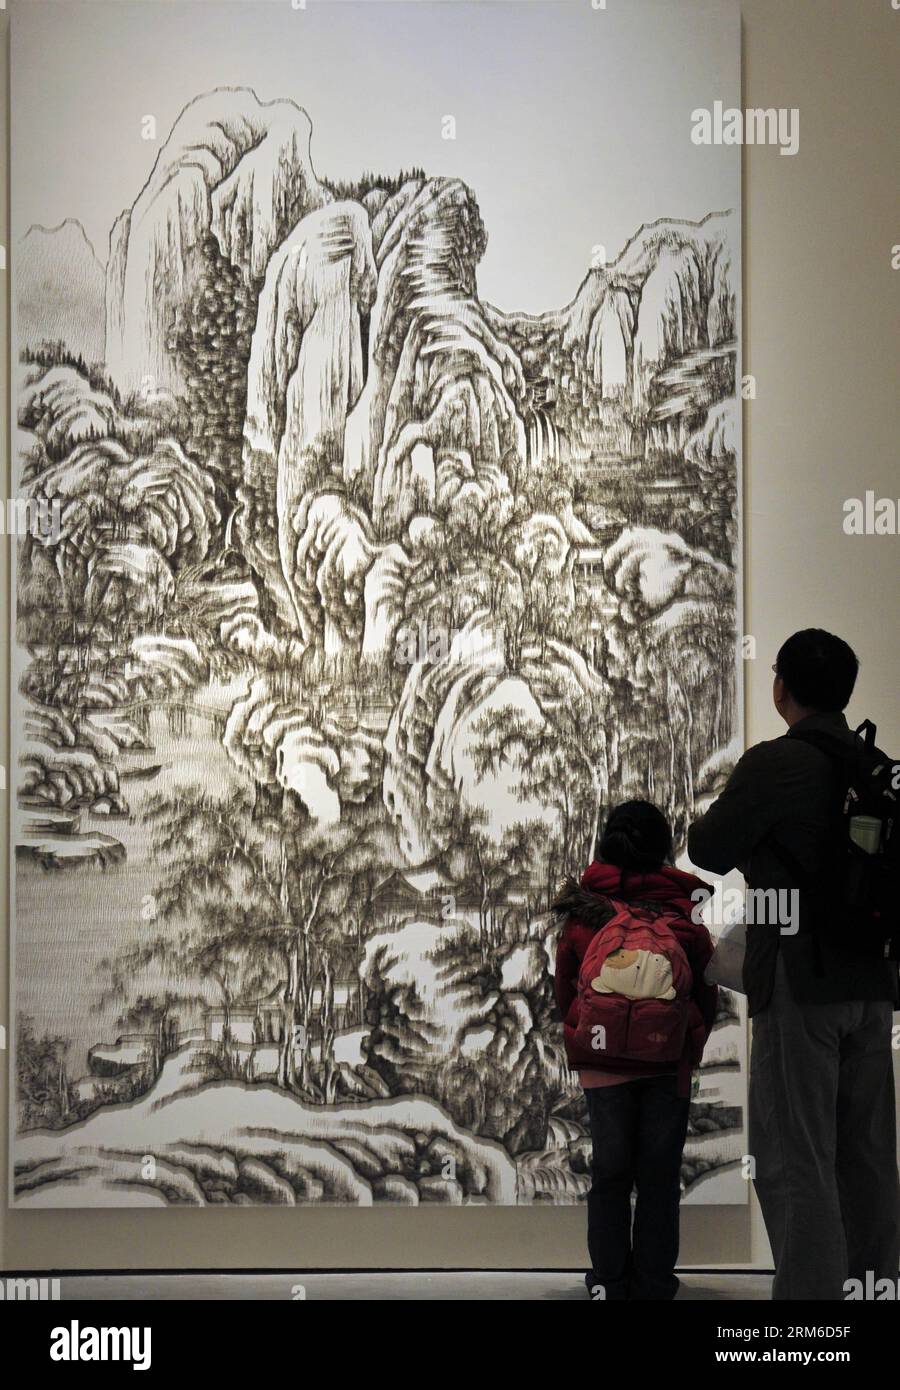 Visitors view a mosquito nail painting at an exhibition showing Chen Chun-Hao s creation in Taipei, southeast China s Taiwan, Jan. 4, 2013. Chen is a Taiwanese artist who replaces paintbrush with nail guns in copying the traditional Chinese ink paintings. He uses a nail gun to shoot thousands of small mosquito nails, or headless nails, into a canvas-covered wood board to reproduce traditional Chinese ink masterpieces. (Xinhua/Wu Ching-teng) (hdt) CHINA-TAIPEI-MOSQUITO NAIL PAINTING (CN) PUBLICATIONxNOTxINxCHN   Visitors View a Mosquito Nail Painting AT to Exhibition showing Chen Chun Hao S Cre Stock Photo